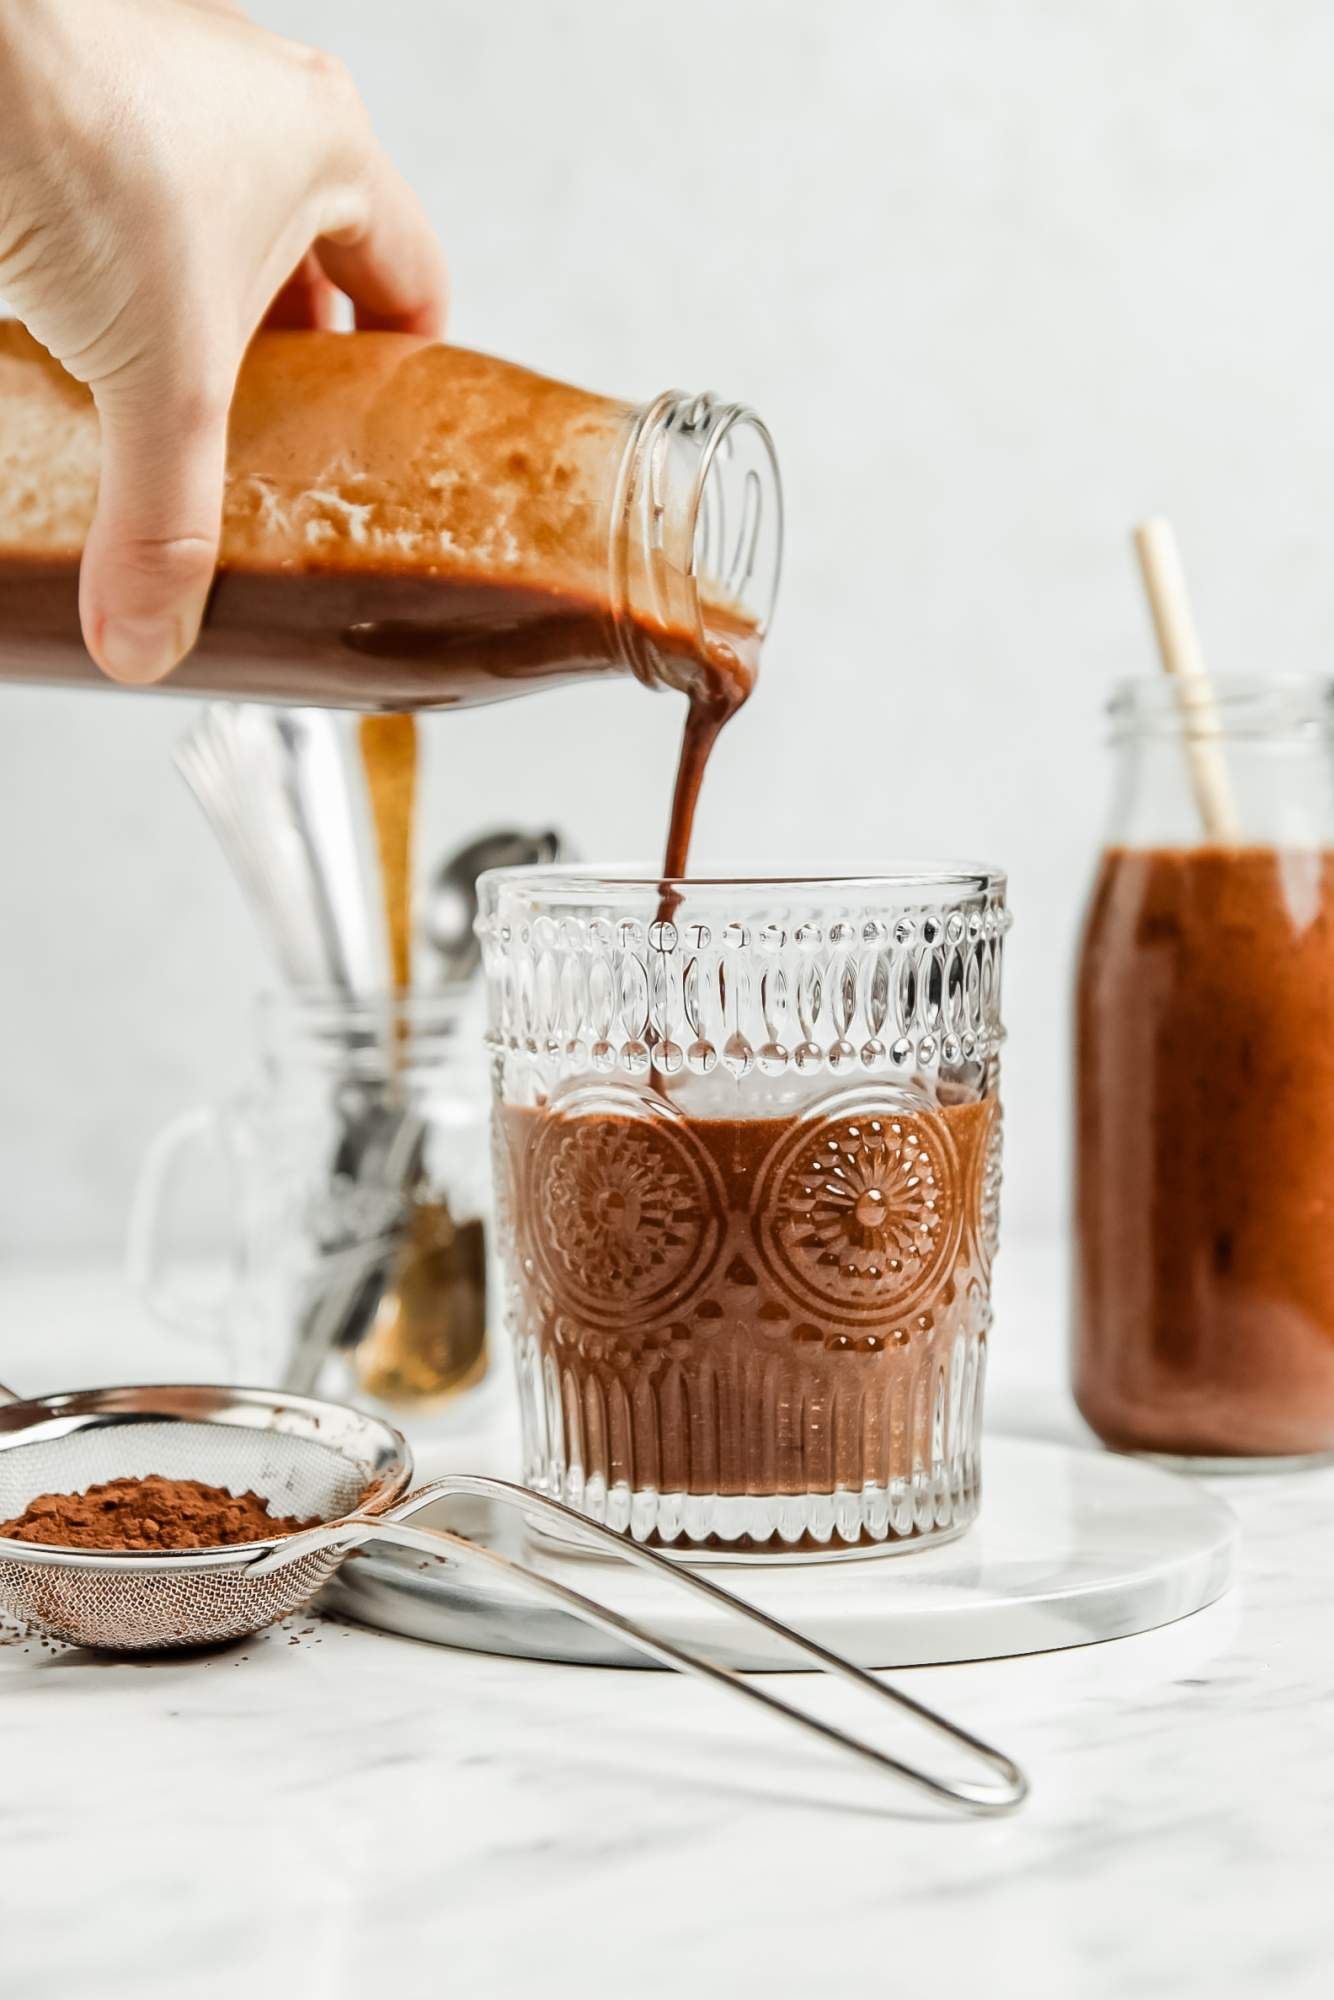 Mocha coffee smoothie with bananas and coffee being poured into a glass.